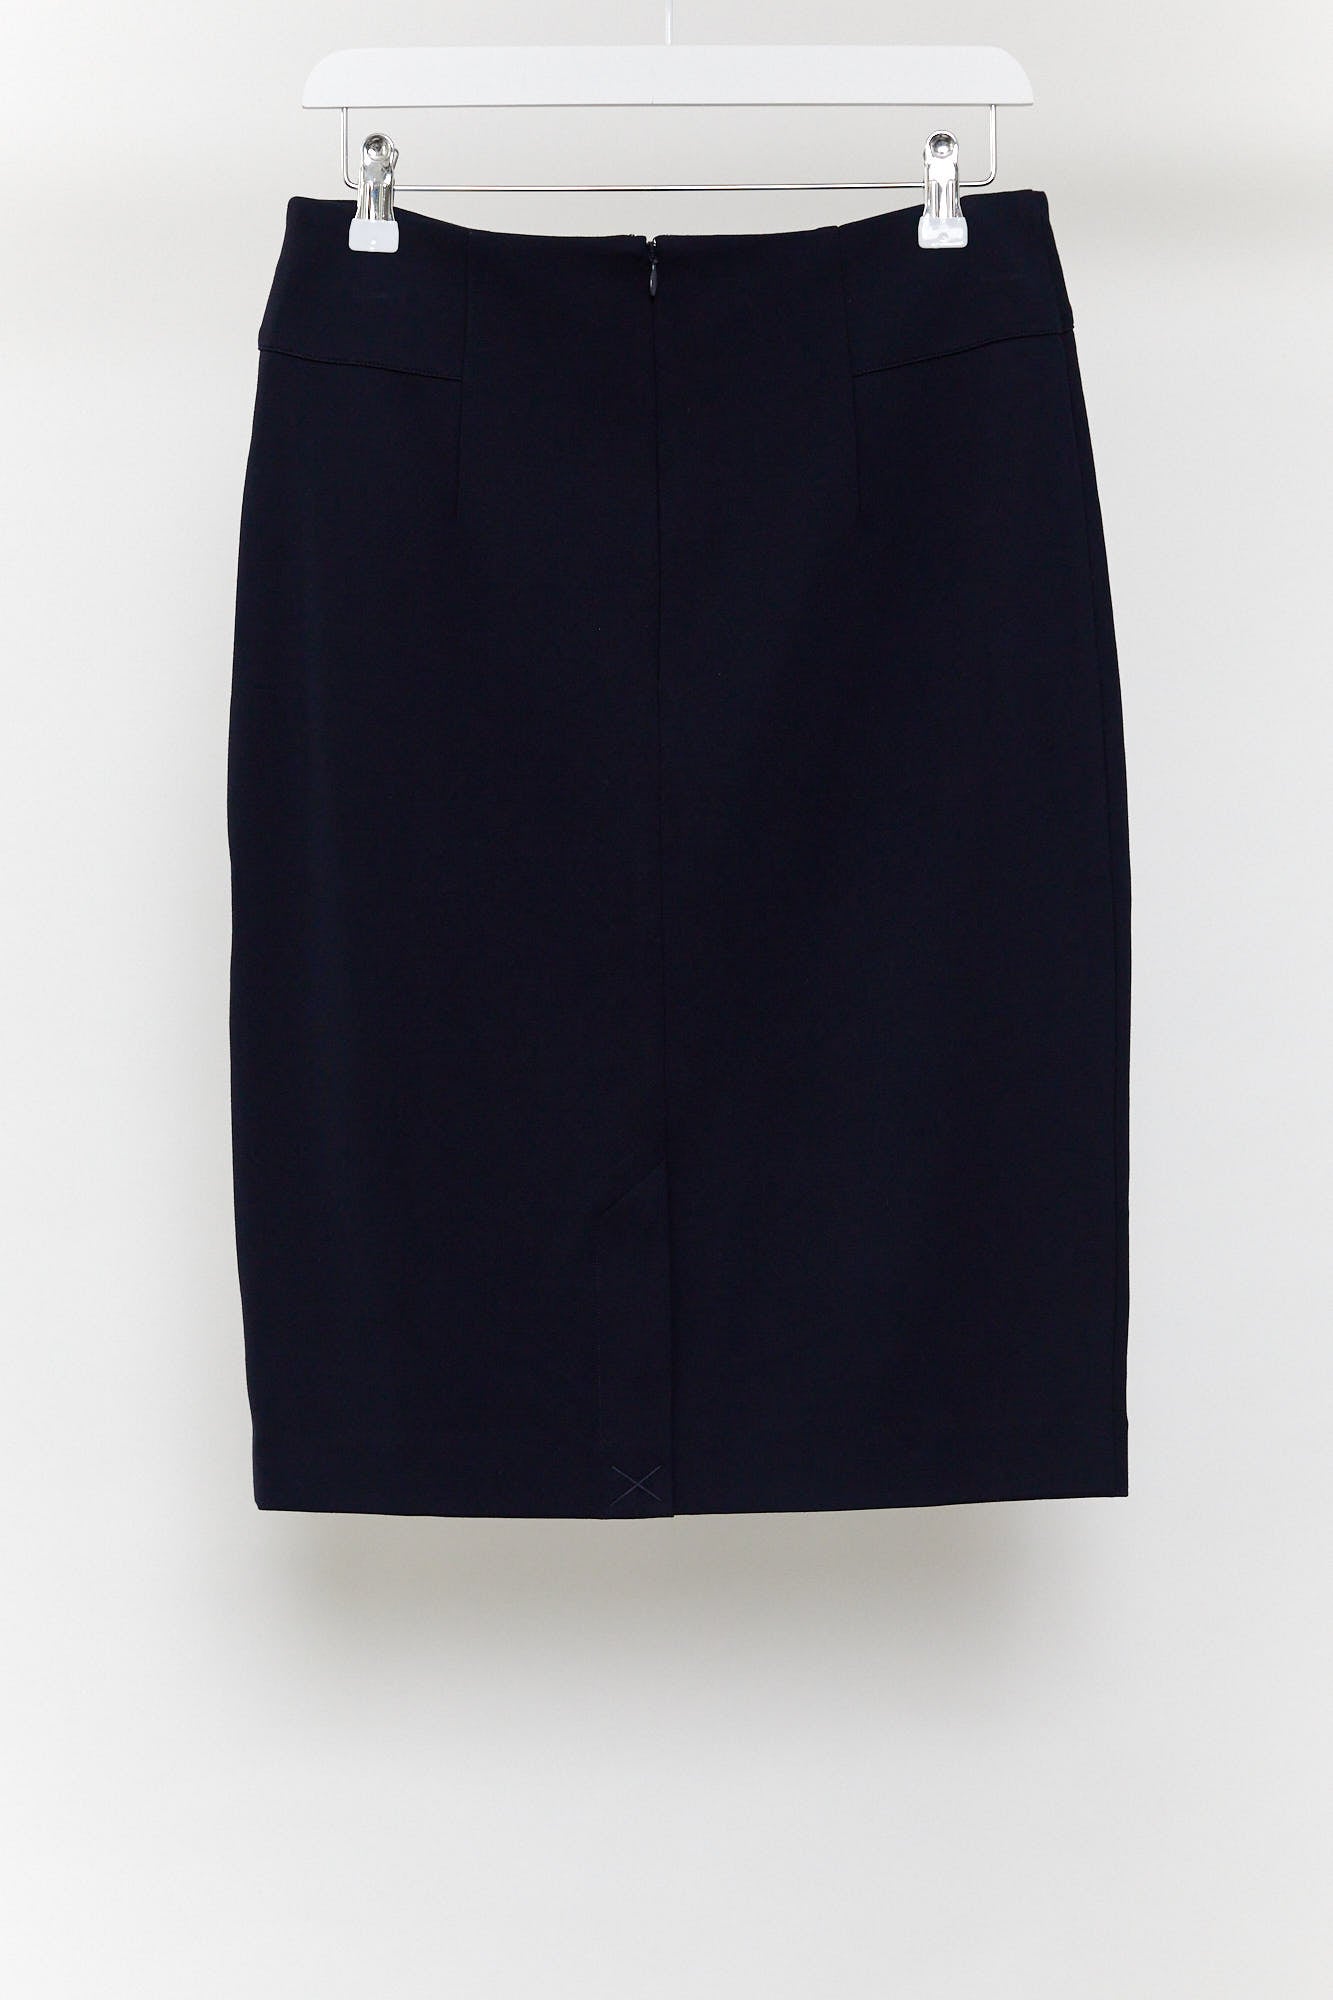 Womens Navy pencil skirt size small